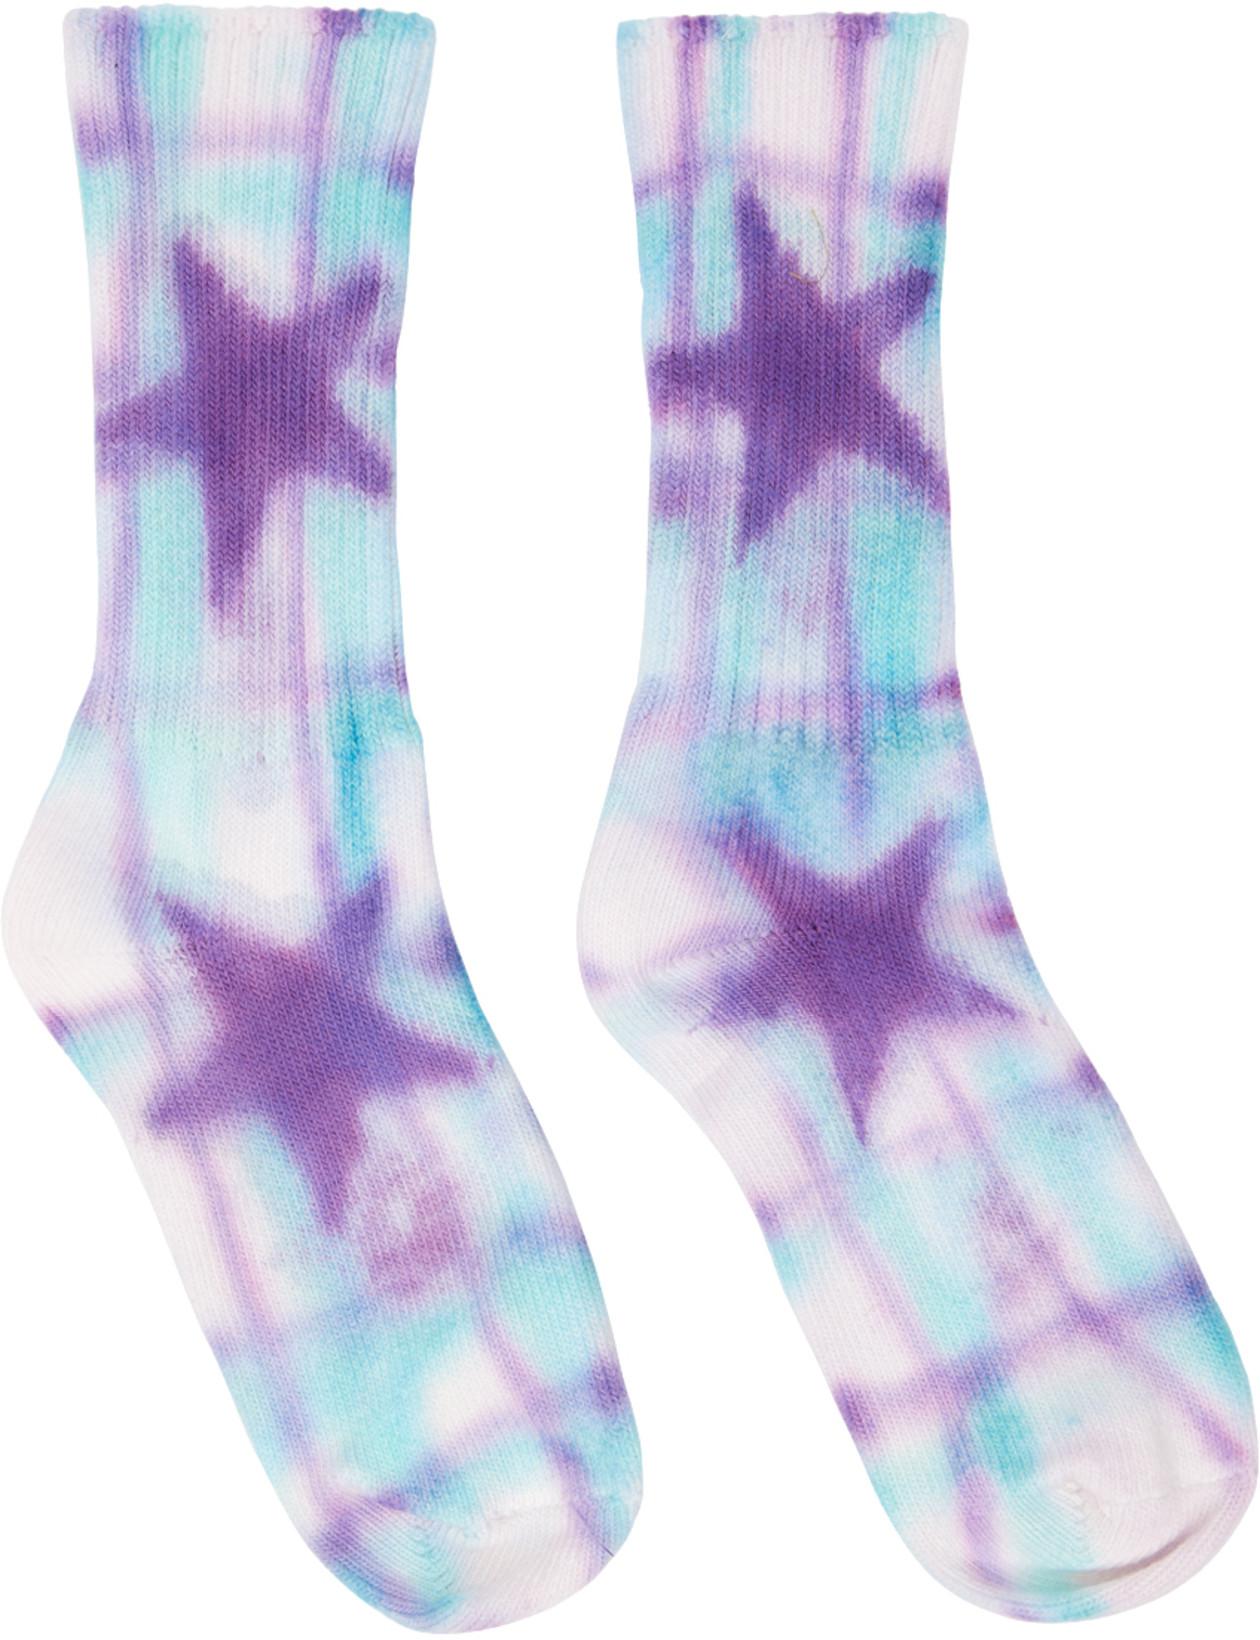 White Dyed Socks by COLLINA STRADA